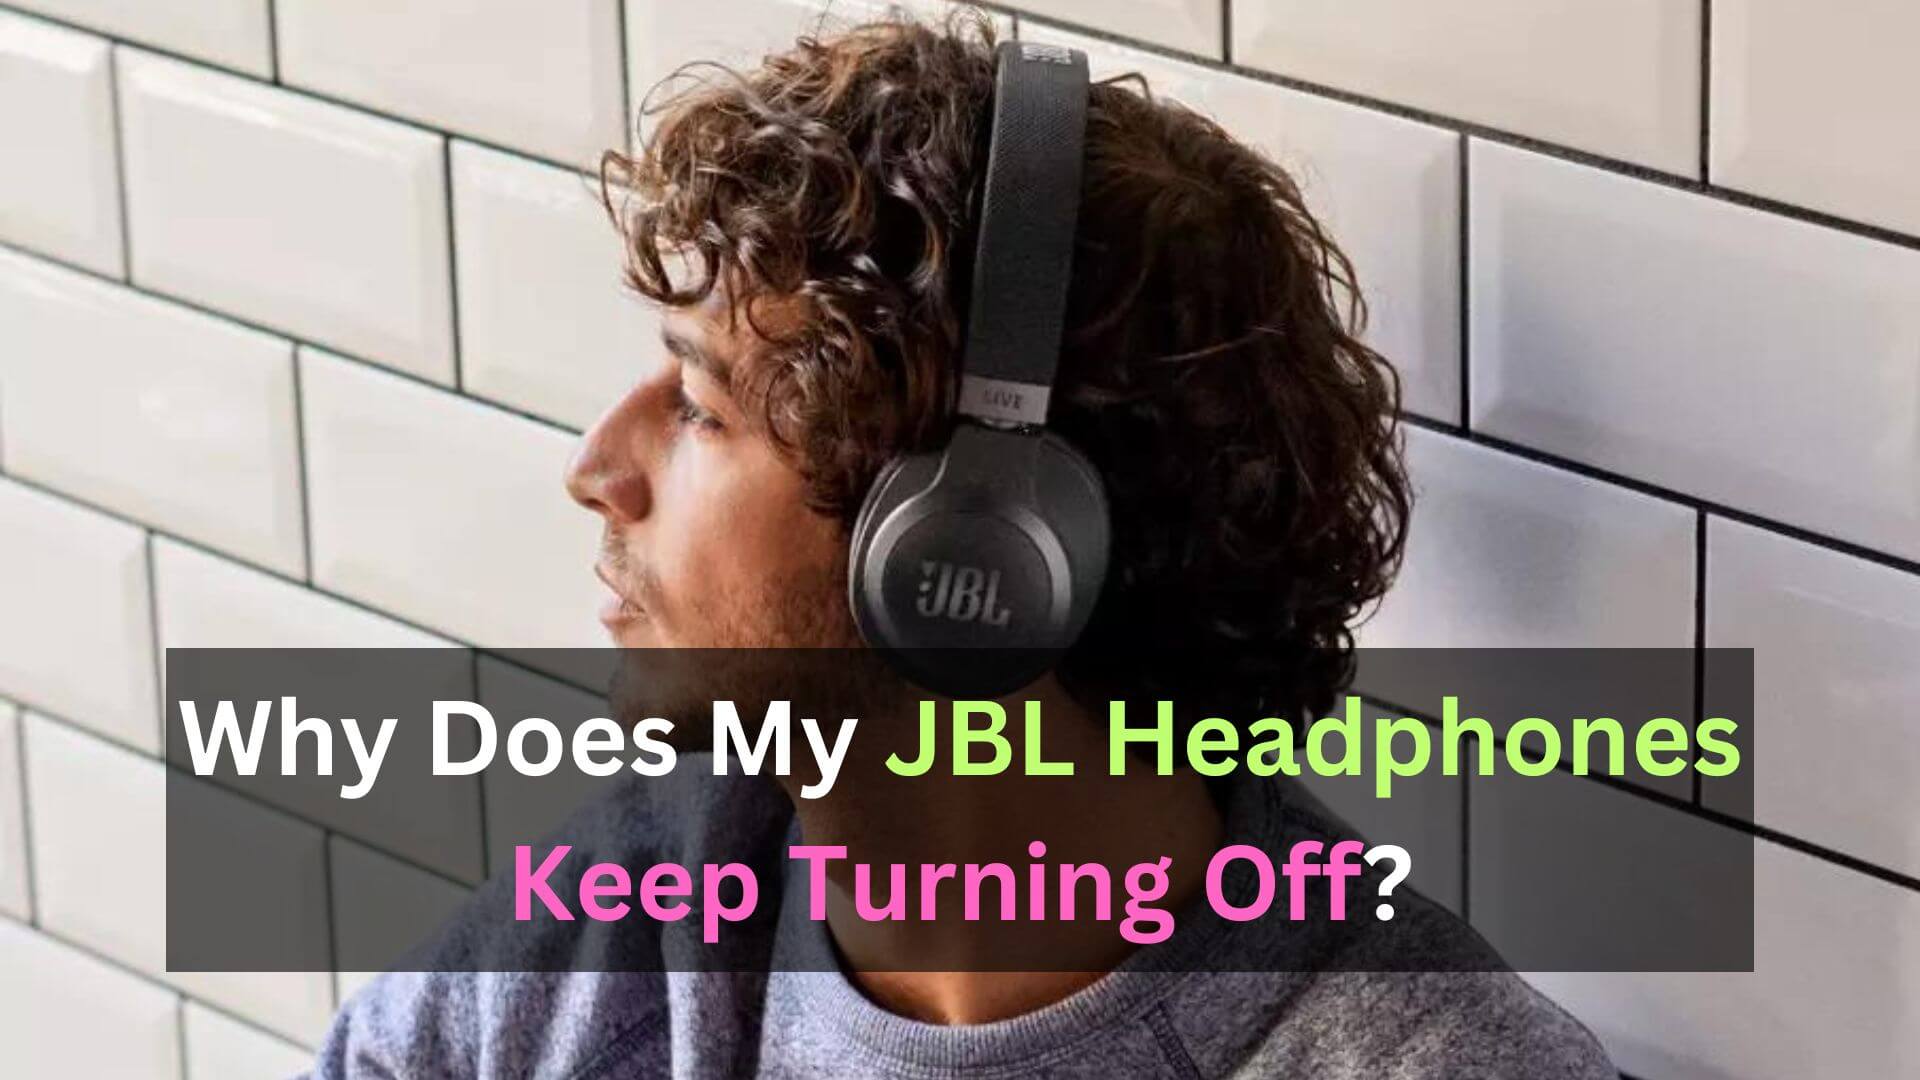 Why Does My JBL Headphones Keep Turning Off